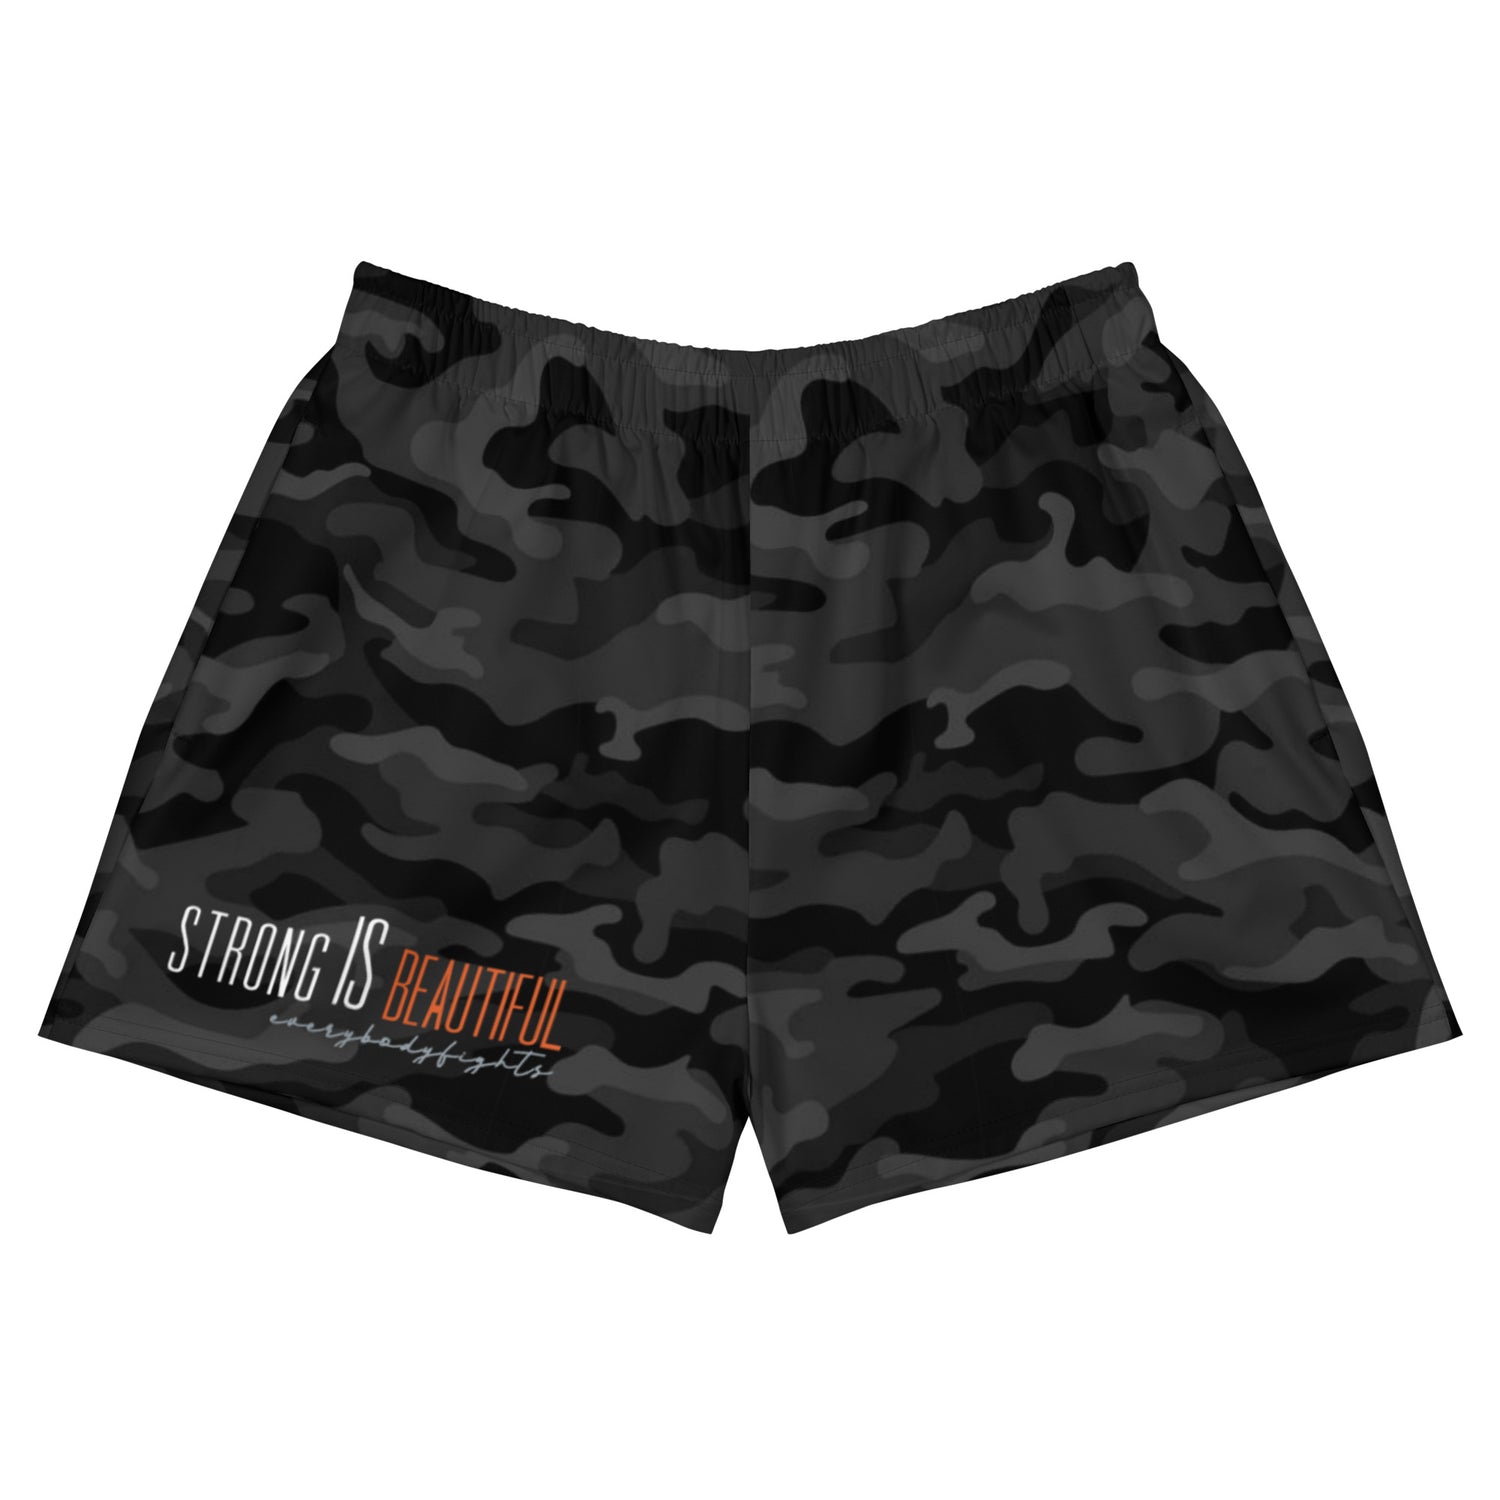 Women’s Recycled Athletic Camo Shorts STRONG IS BEAUTIFUL